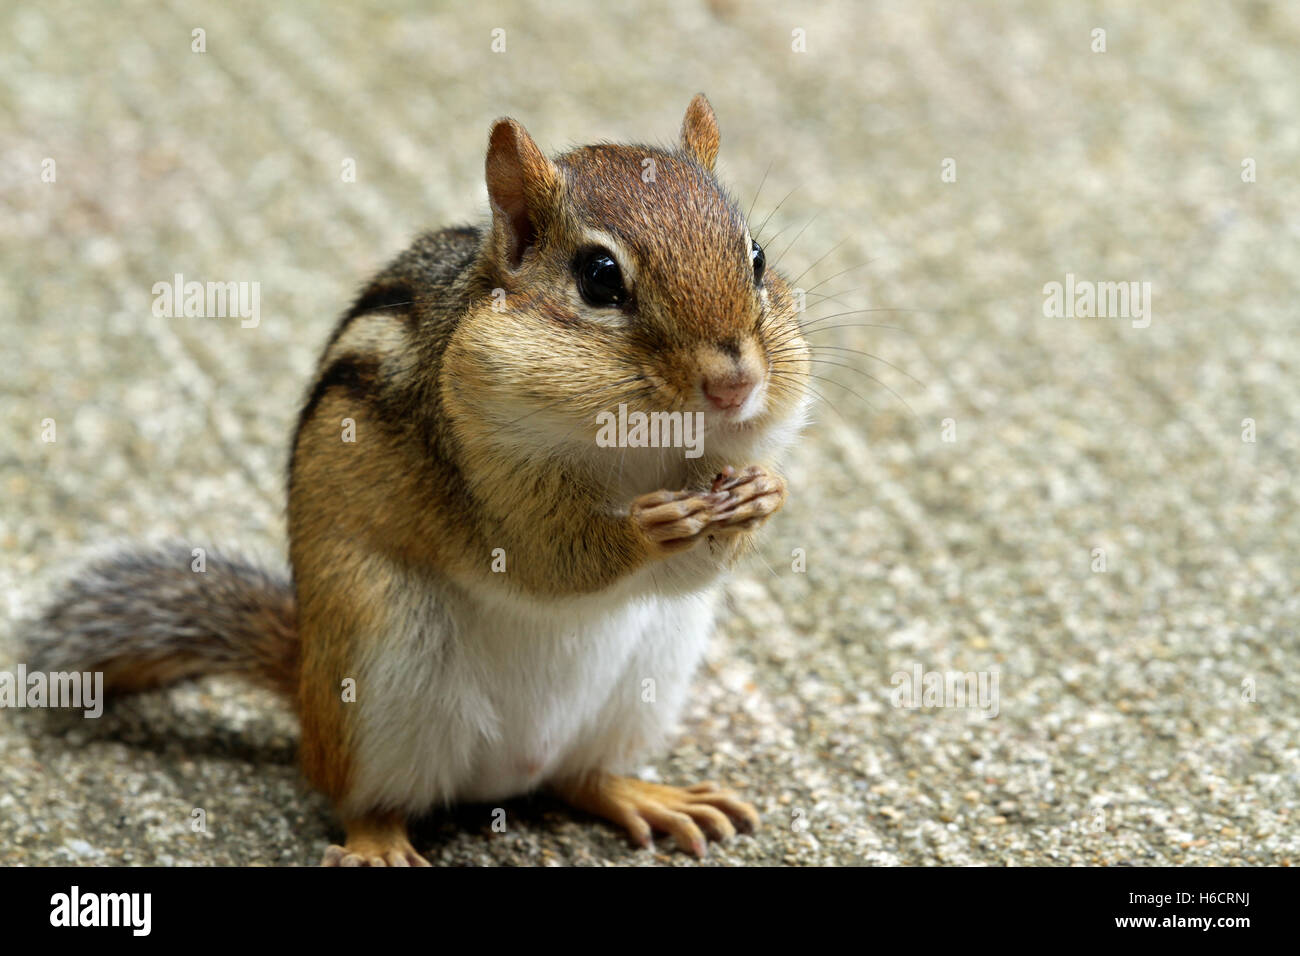 Eastern chipmunk (Tamias striatus) filling its cheeks with a nut Stock Photo